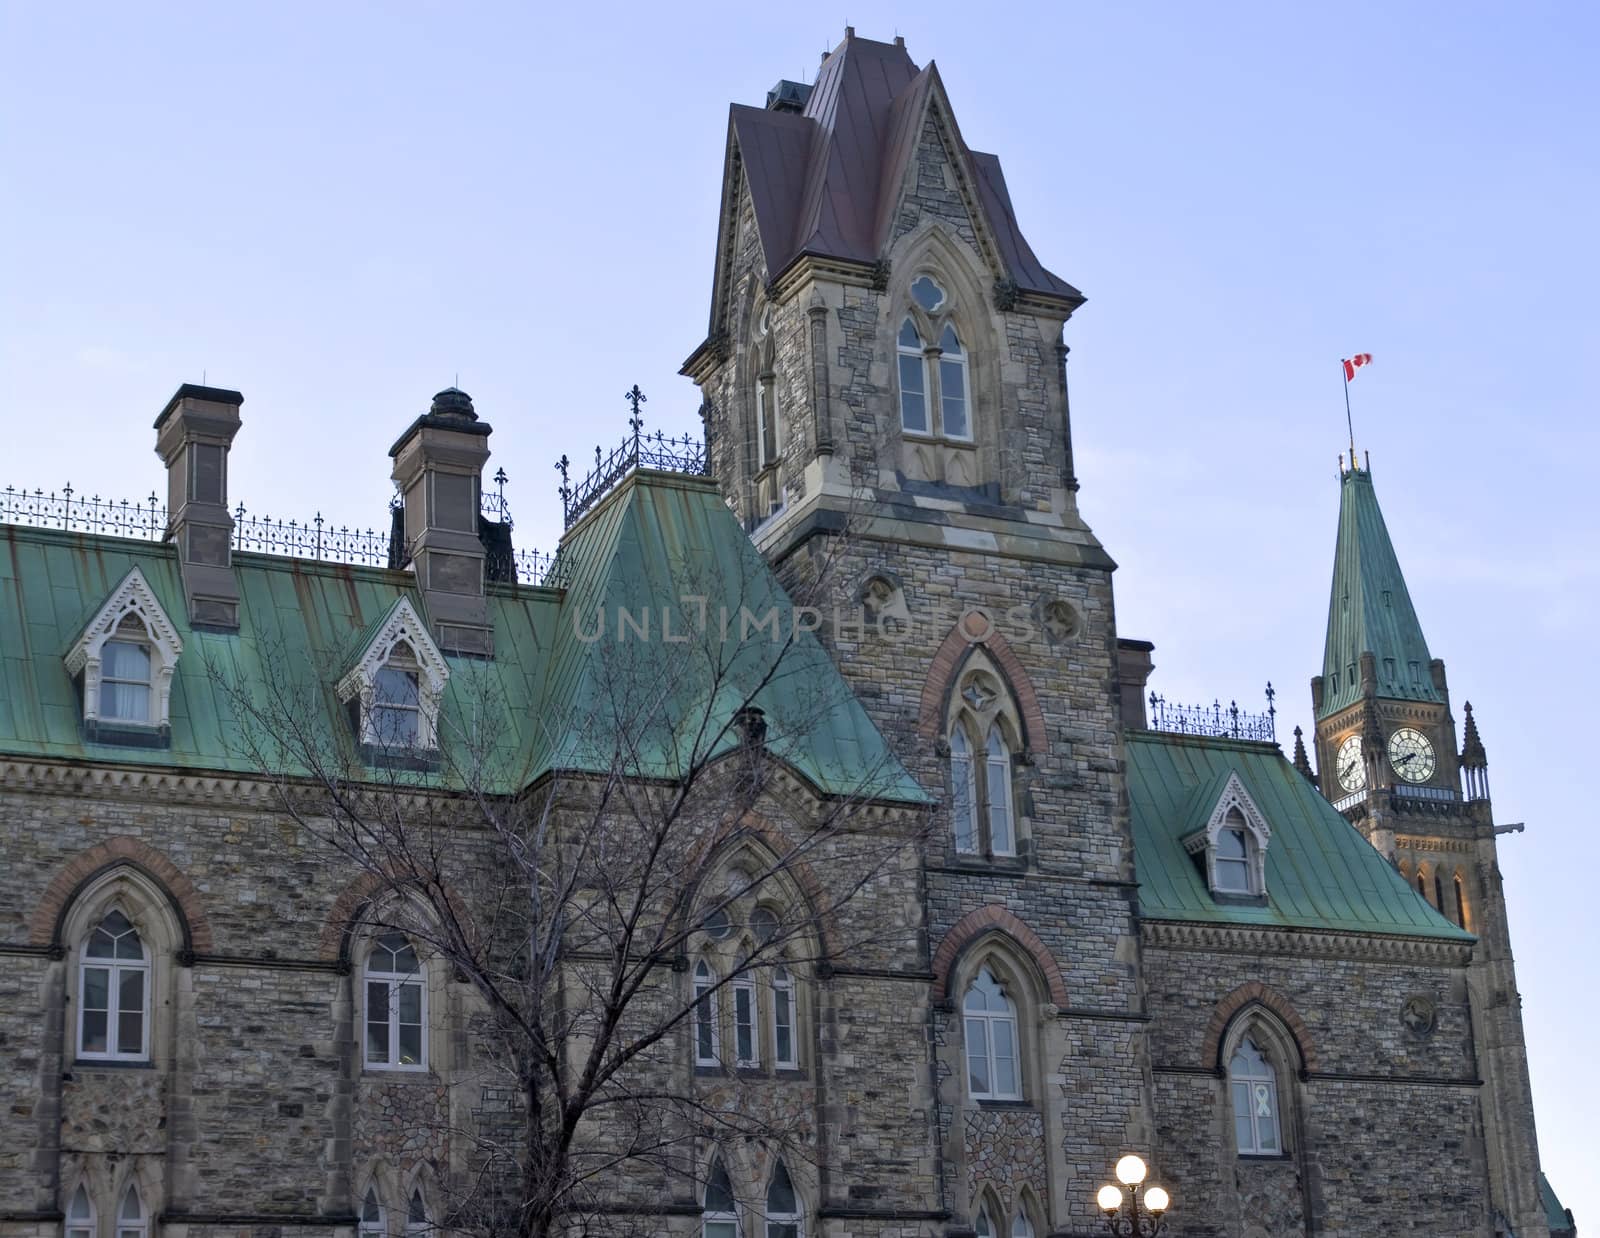 The canadian Parliament West block in the foreground and the Centre Block clock.